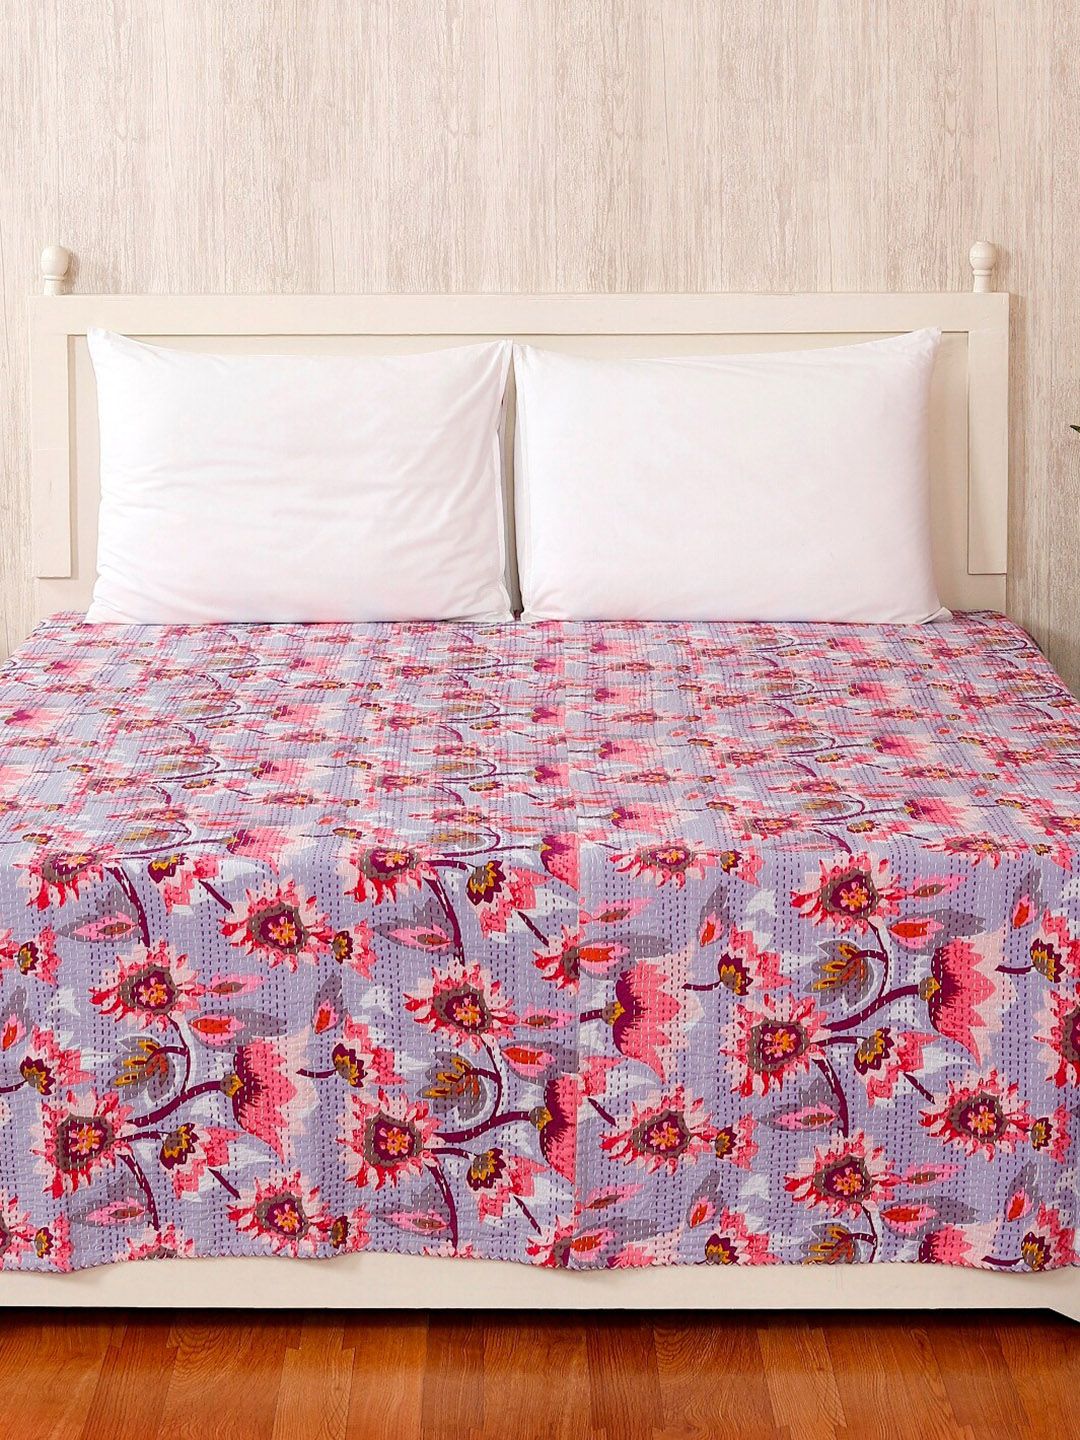 HANDICRAFT PALACE Grey & Pink Floral Printed Kantha Embroidered Cotton Double Bed Cover Price in India